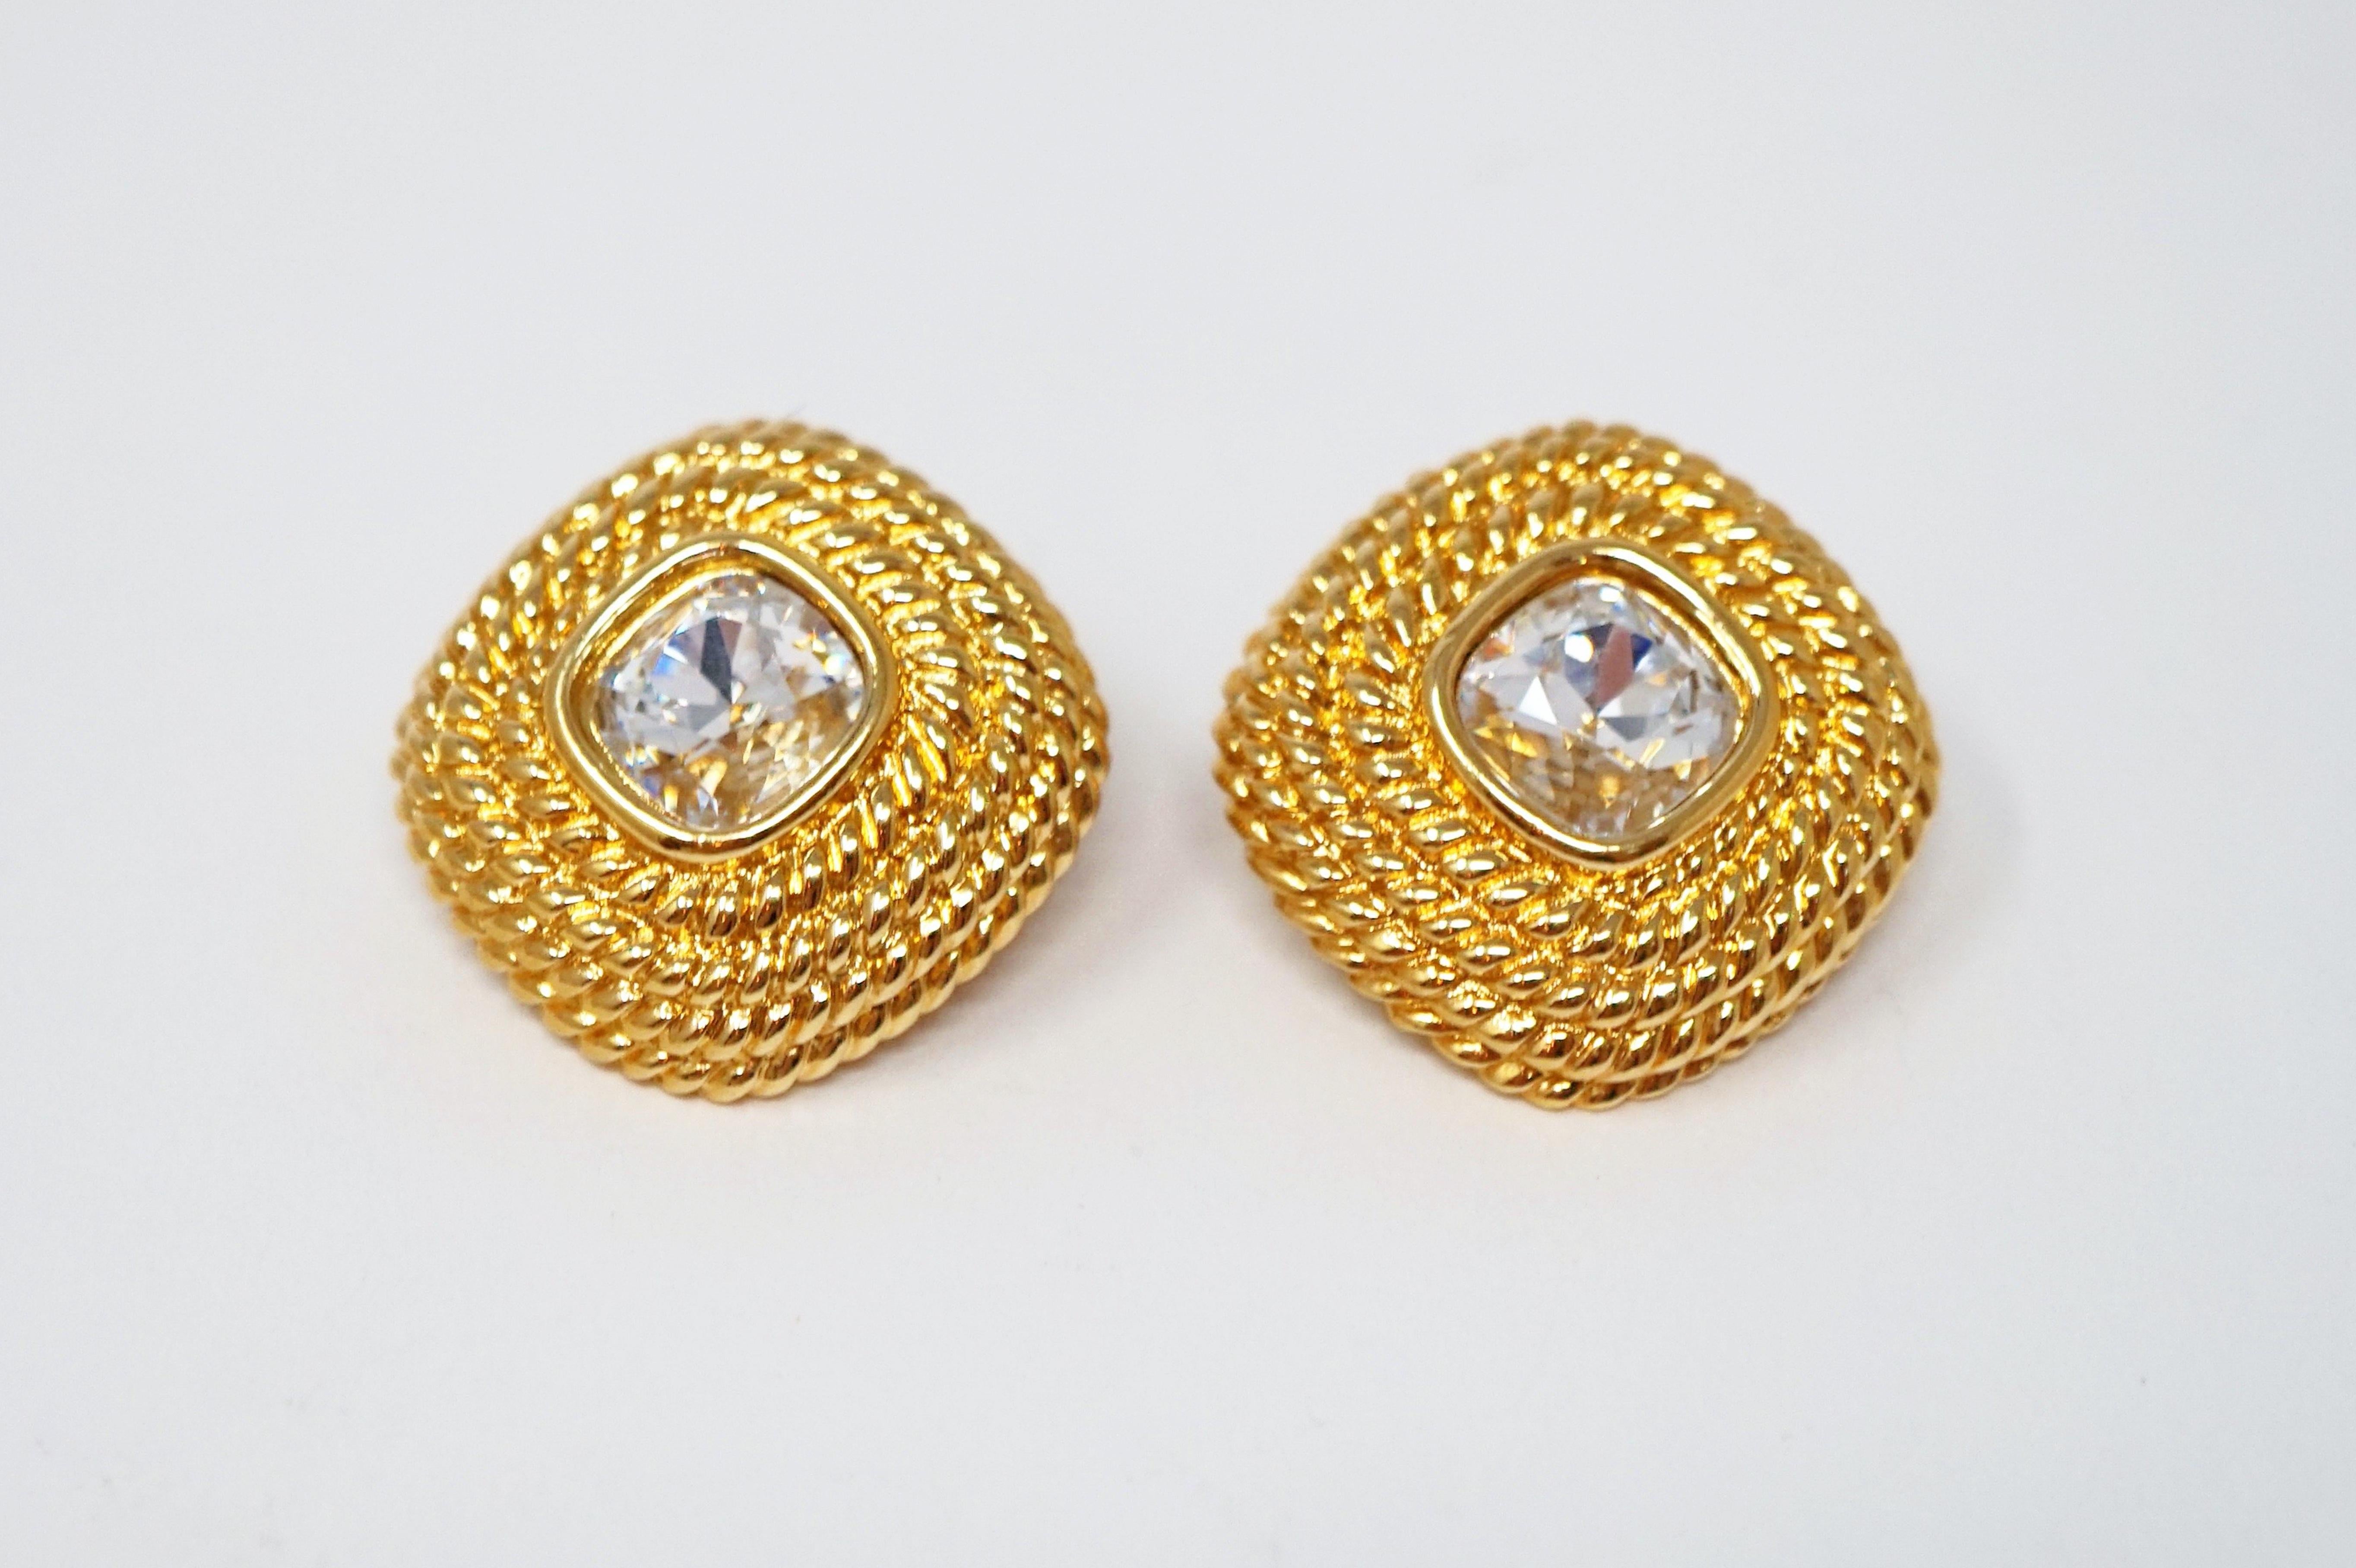 These gorgeous gold-plated statement earrings with faceted Swarovski crystal by Swarovski are perfect for adding a touch of sparkle to your look!  Classic braided texture frames a focal Swarovski crystal that catches the light beautifully.